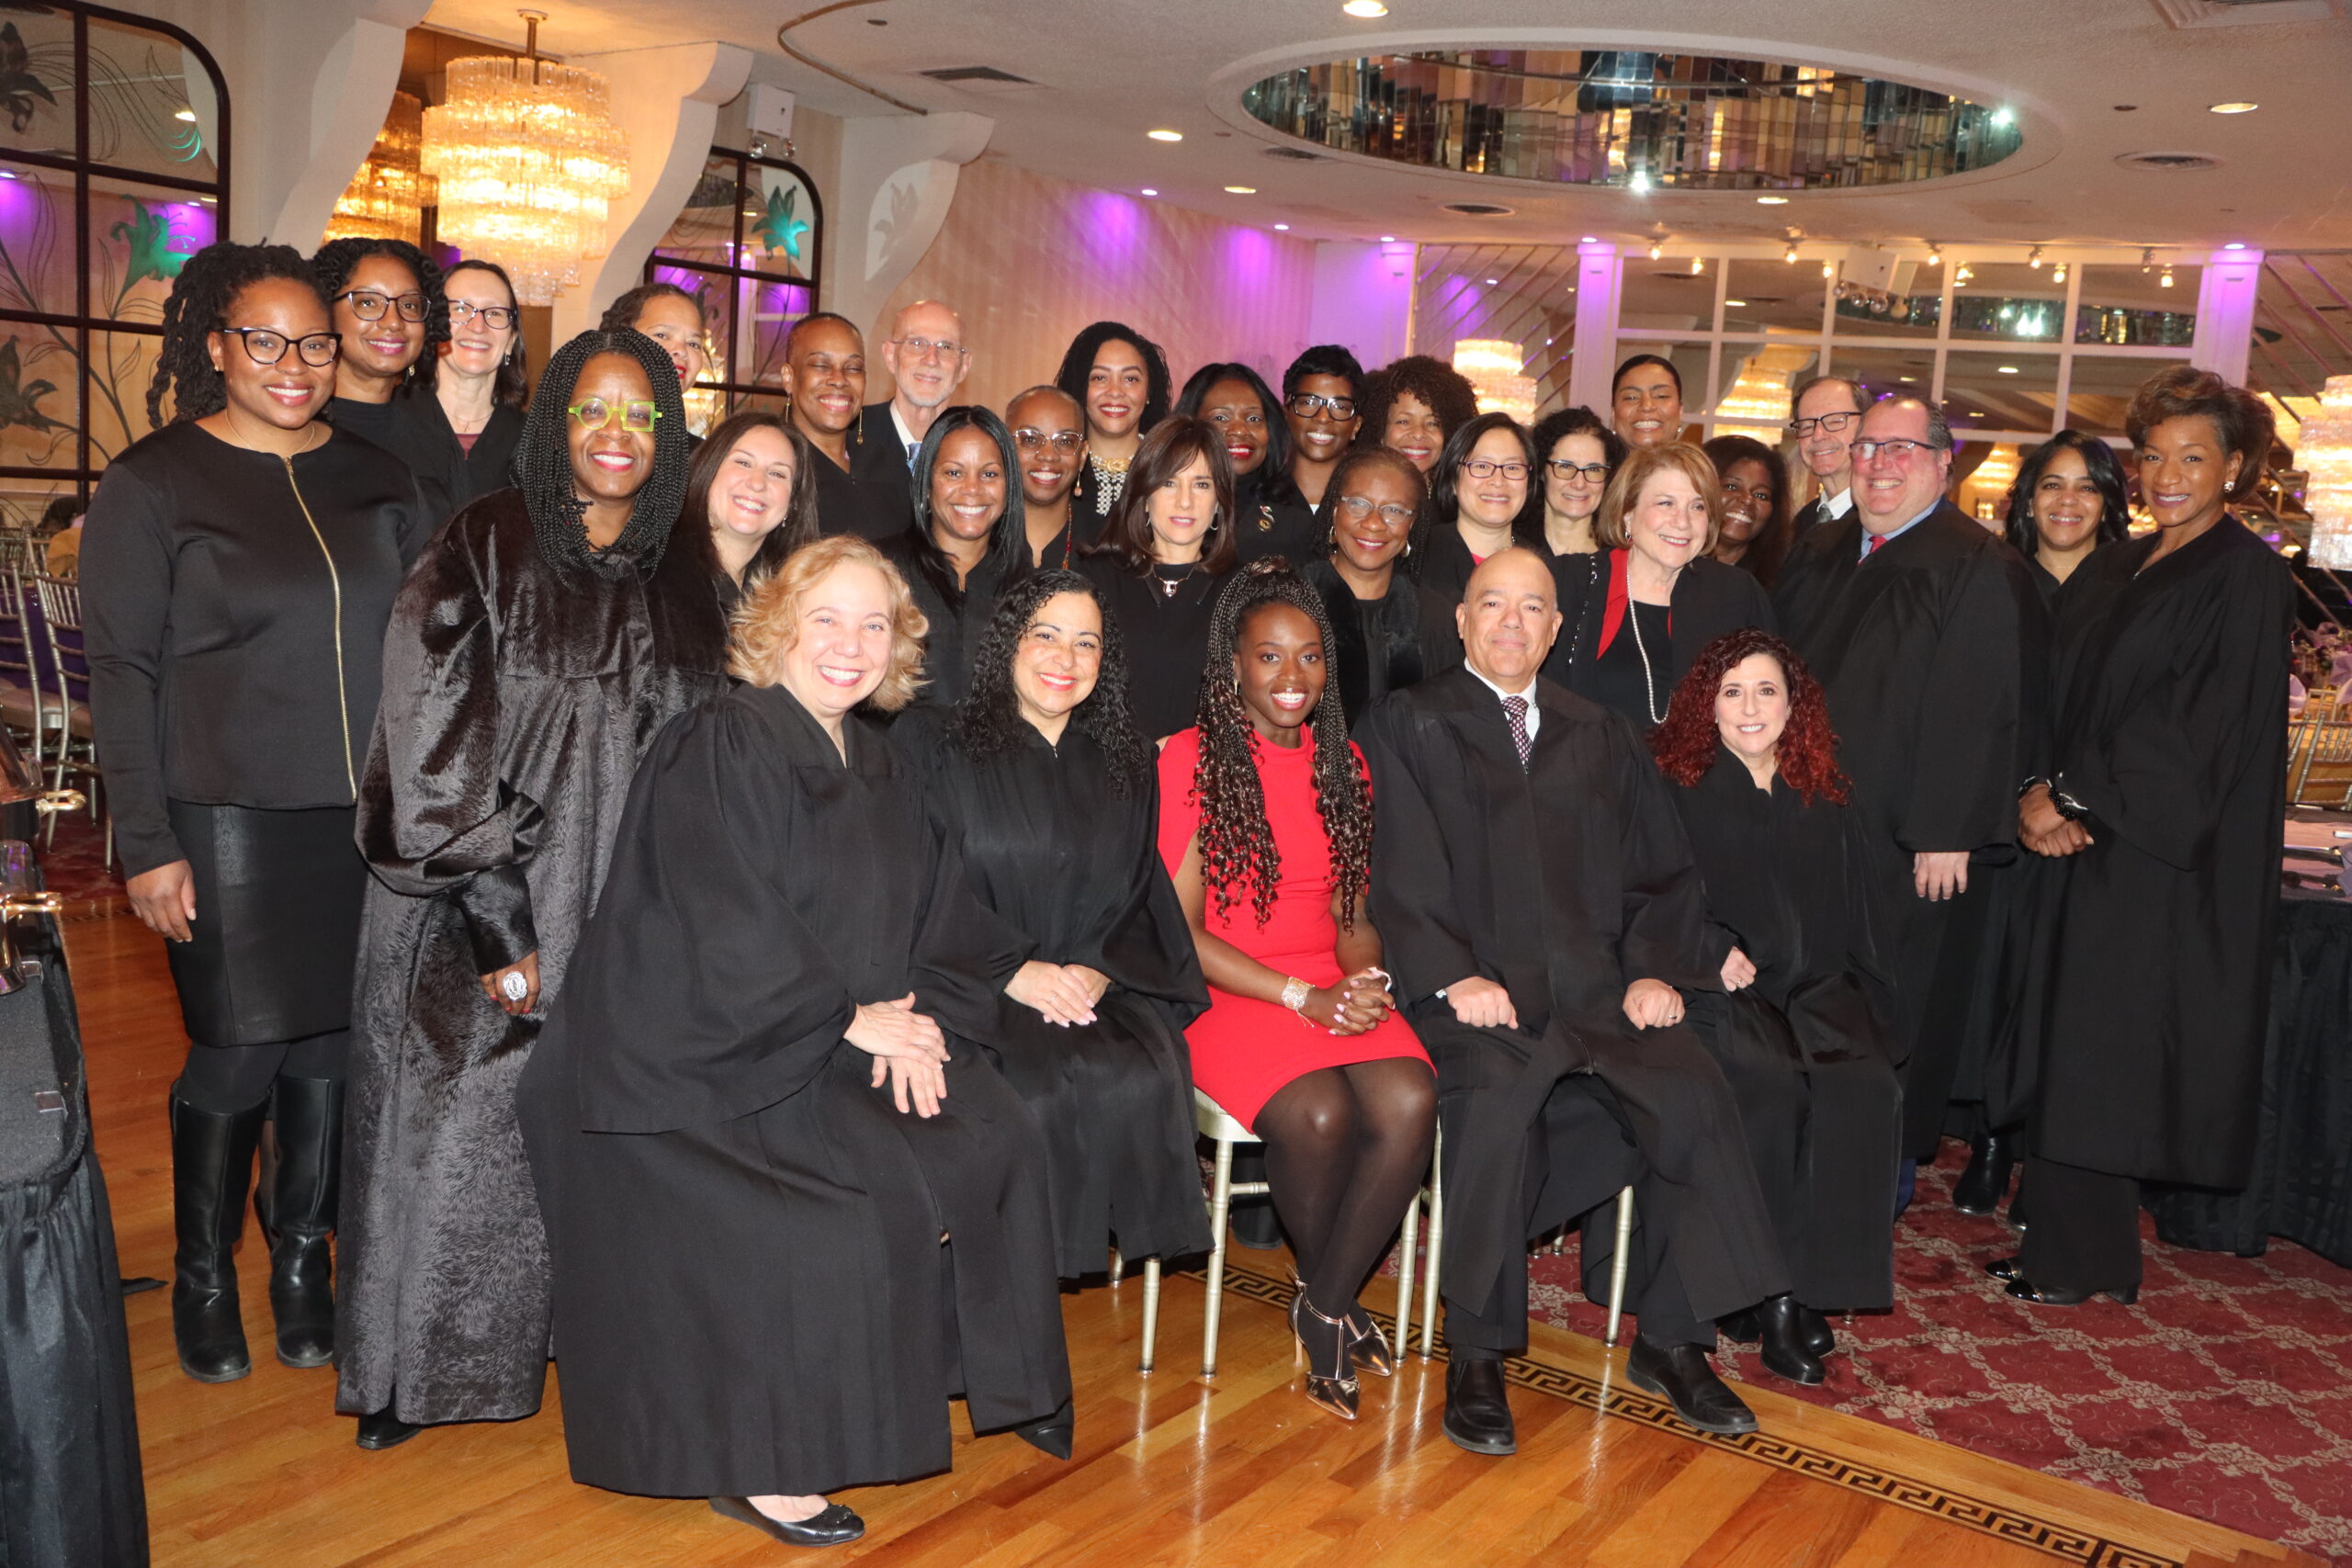 A “united front” of Brooklyn judges gathers in support of Judge Betsey Jean-Jacques' induction.